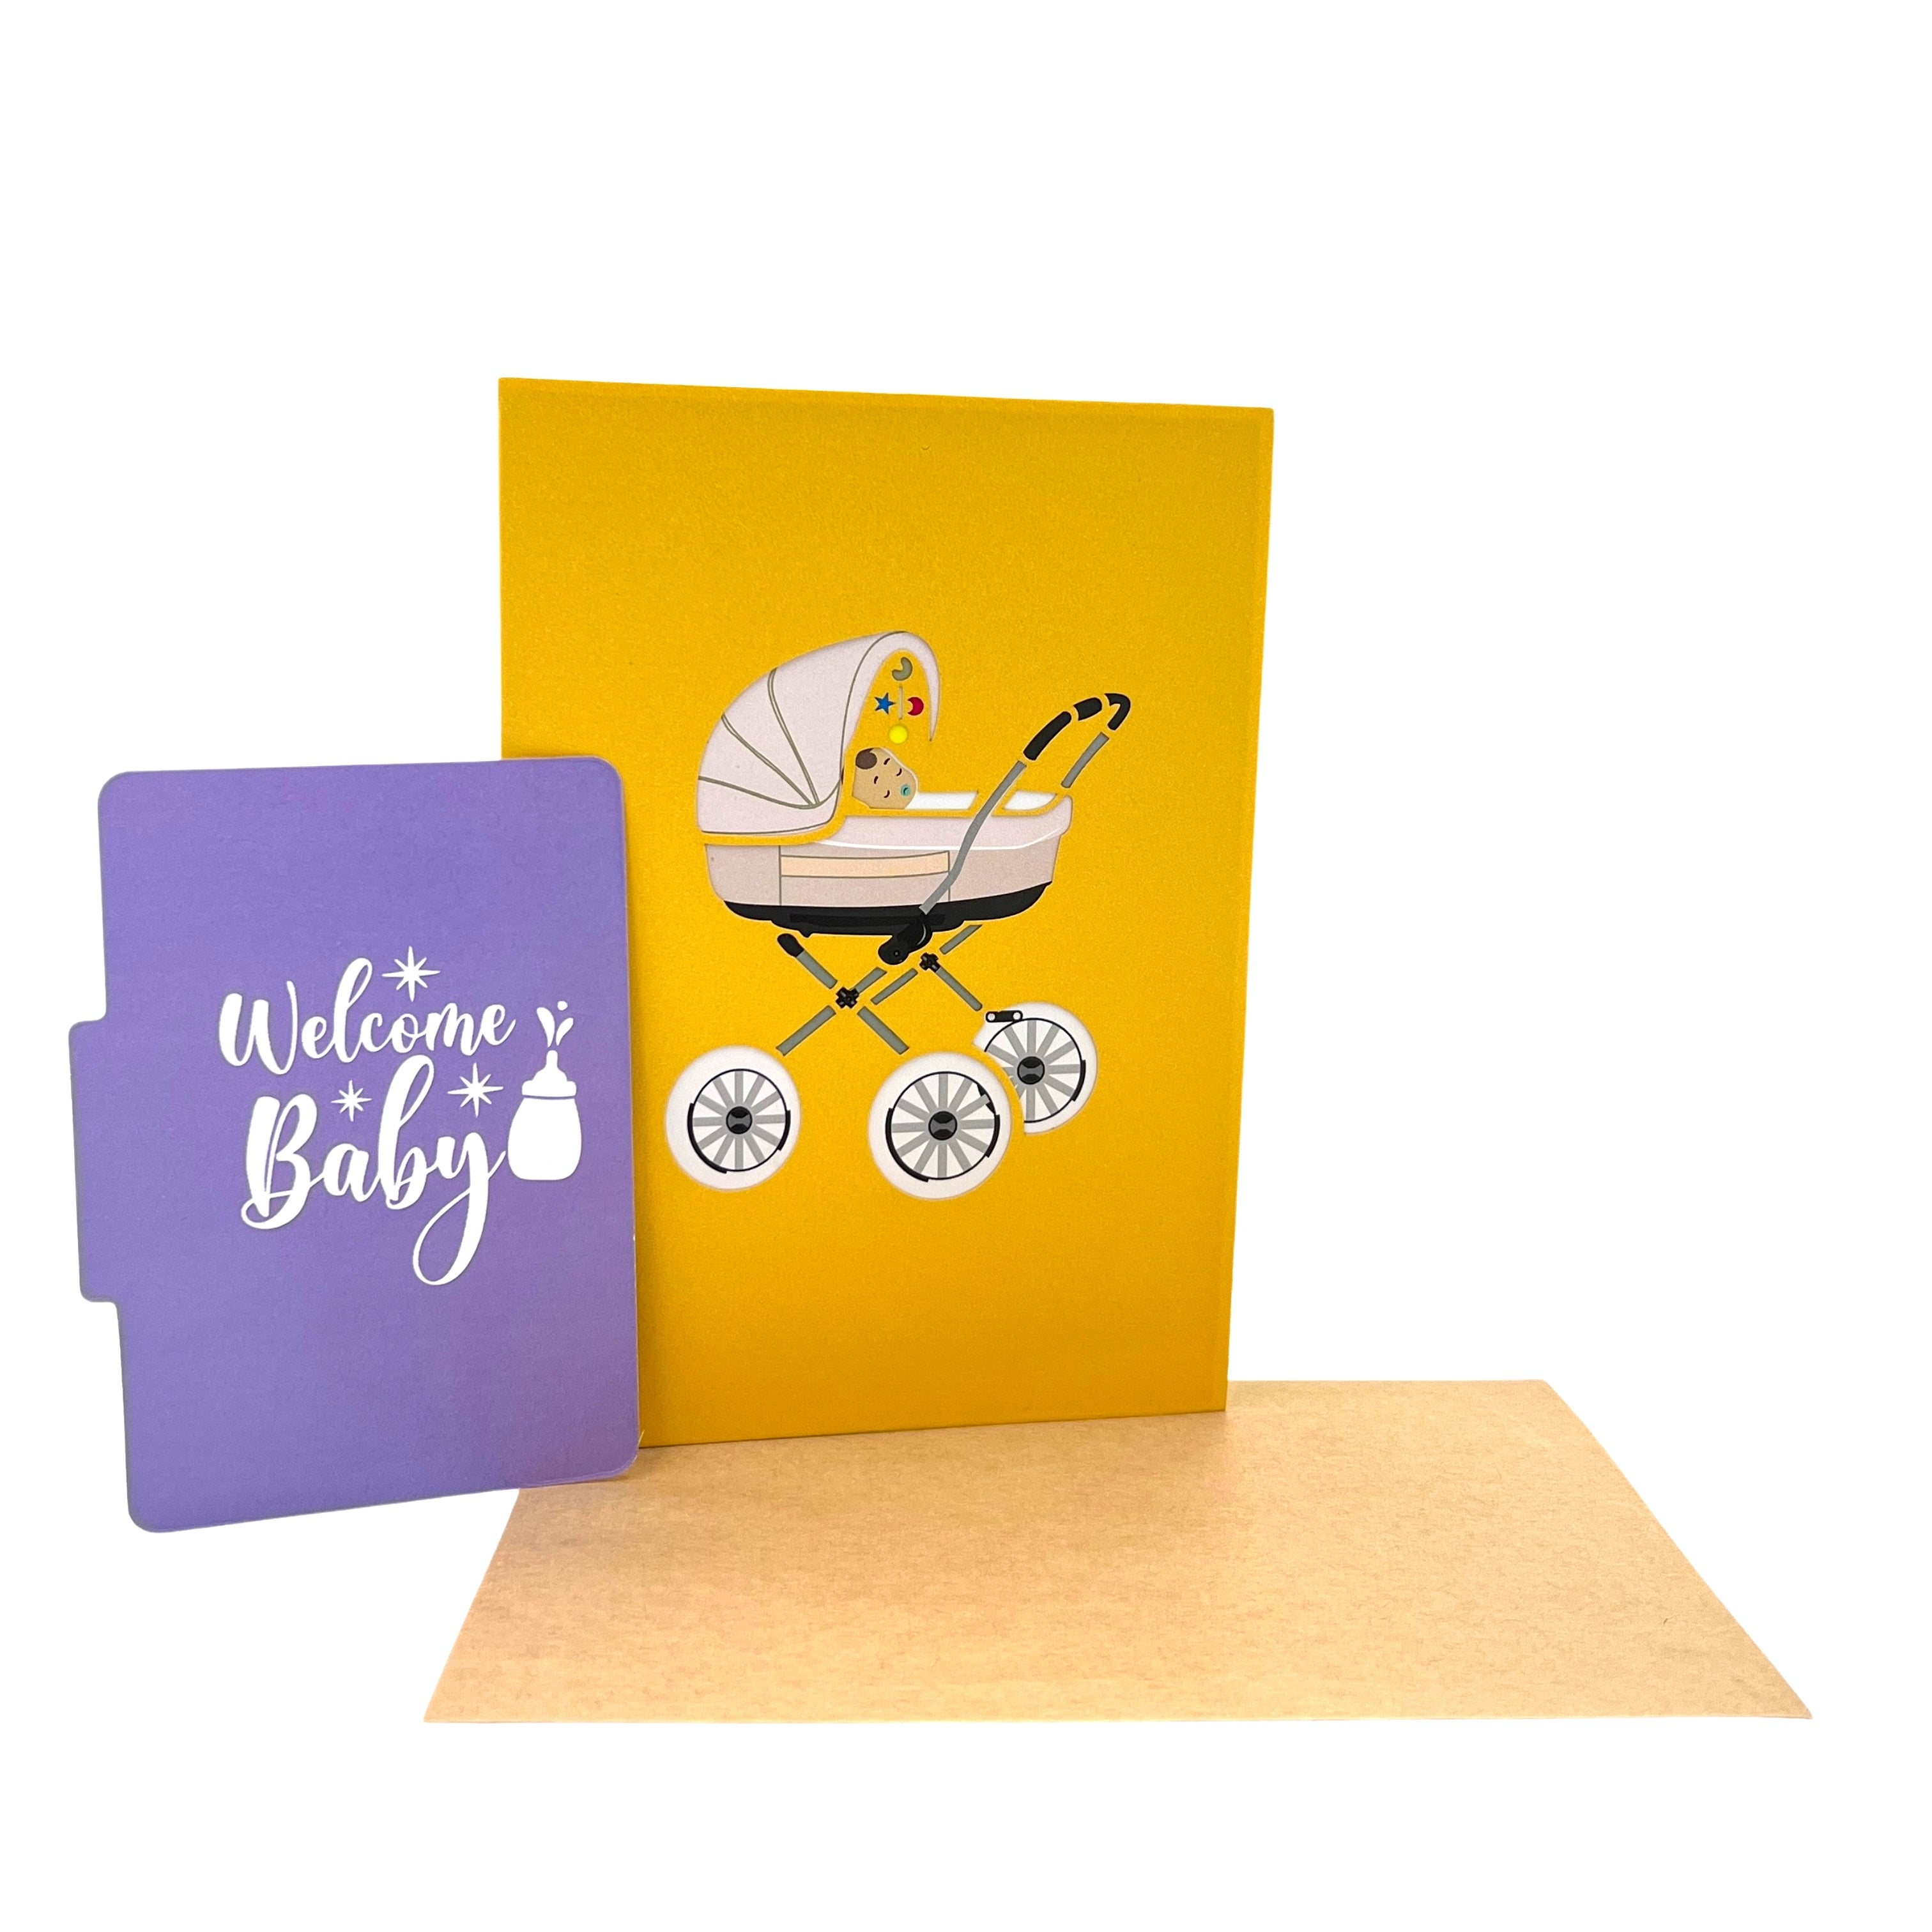 Pop Up Greeting Card, Baby Newborn Card, Congratulation Card, Pregnancy Card, New Baby New Parents Card, Baby Shower Card, Bump to Baby Card